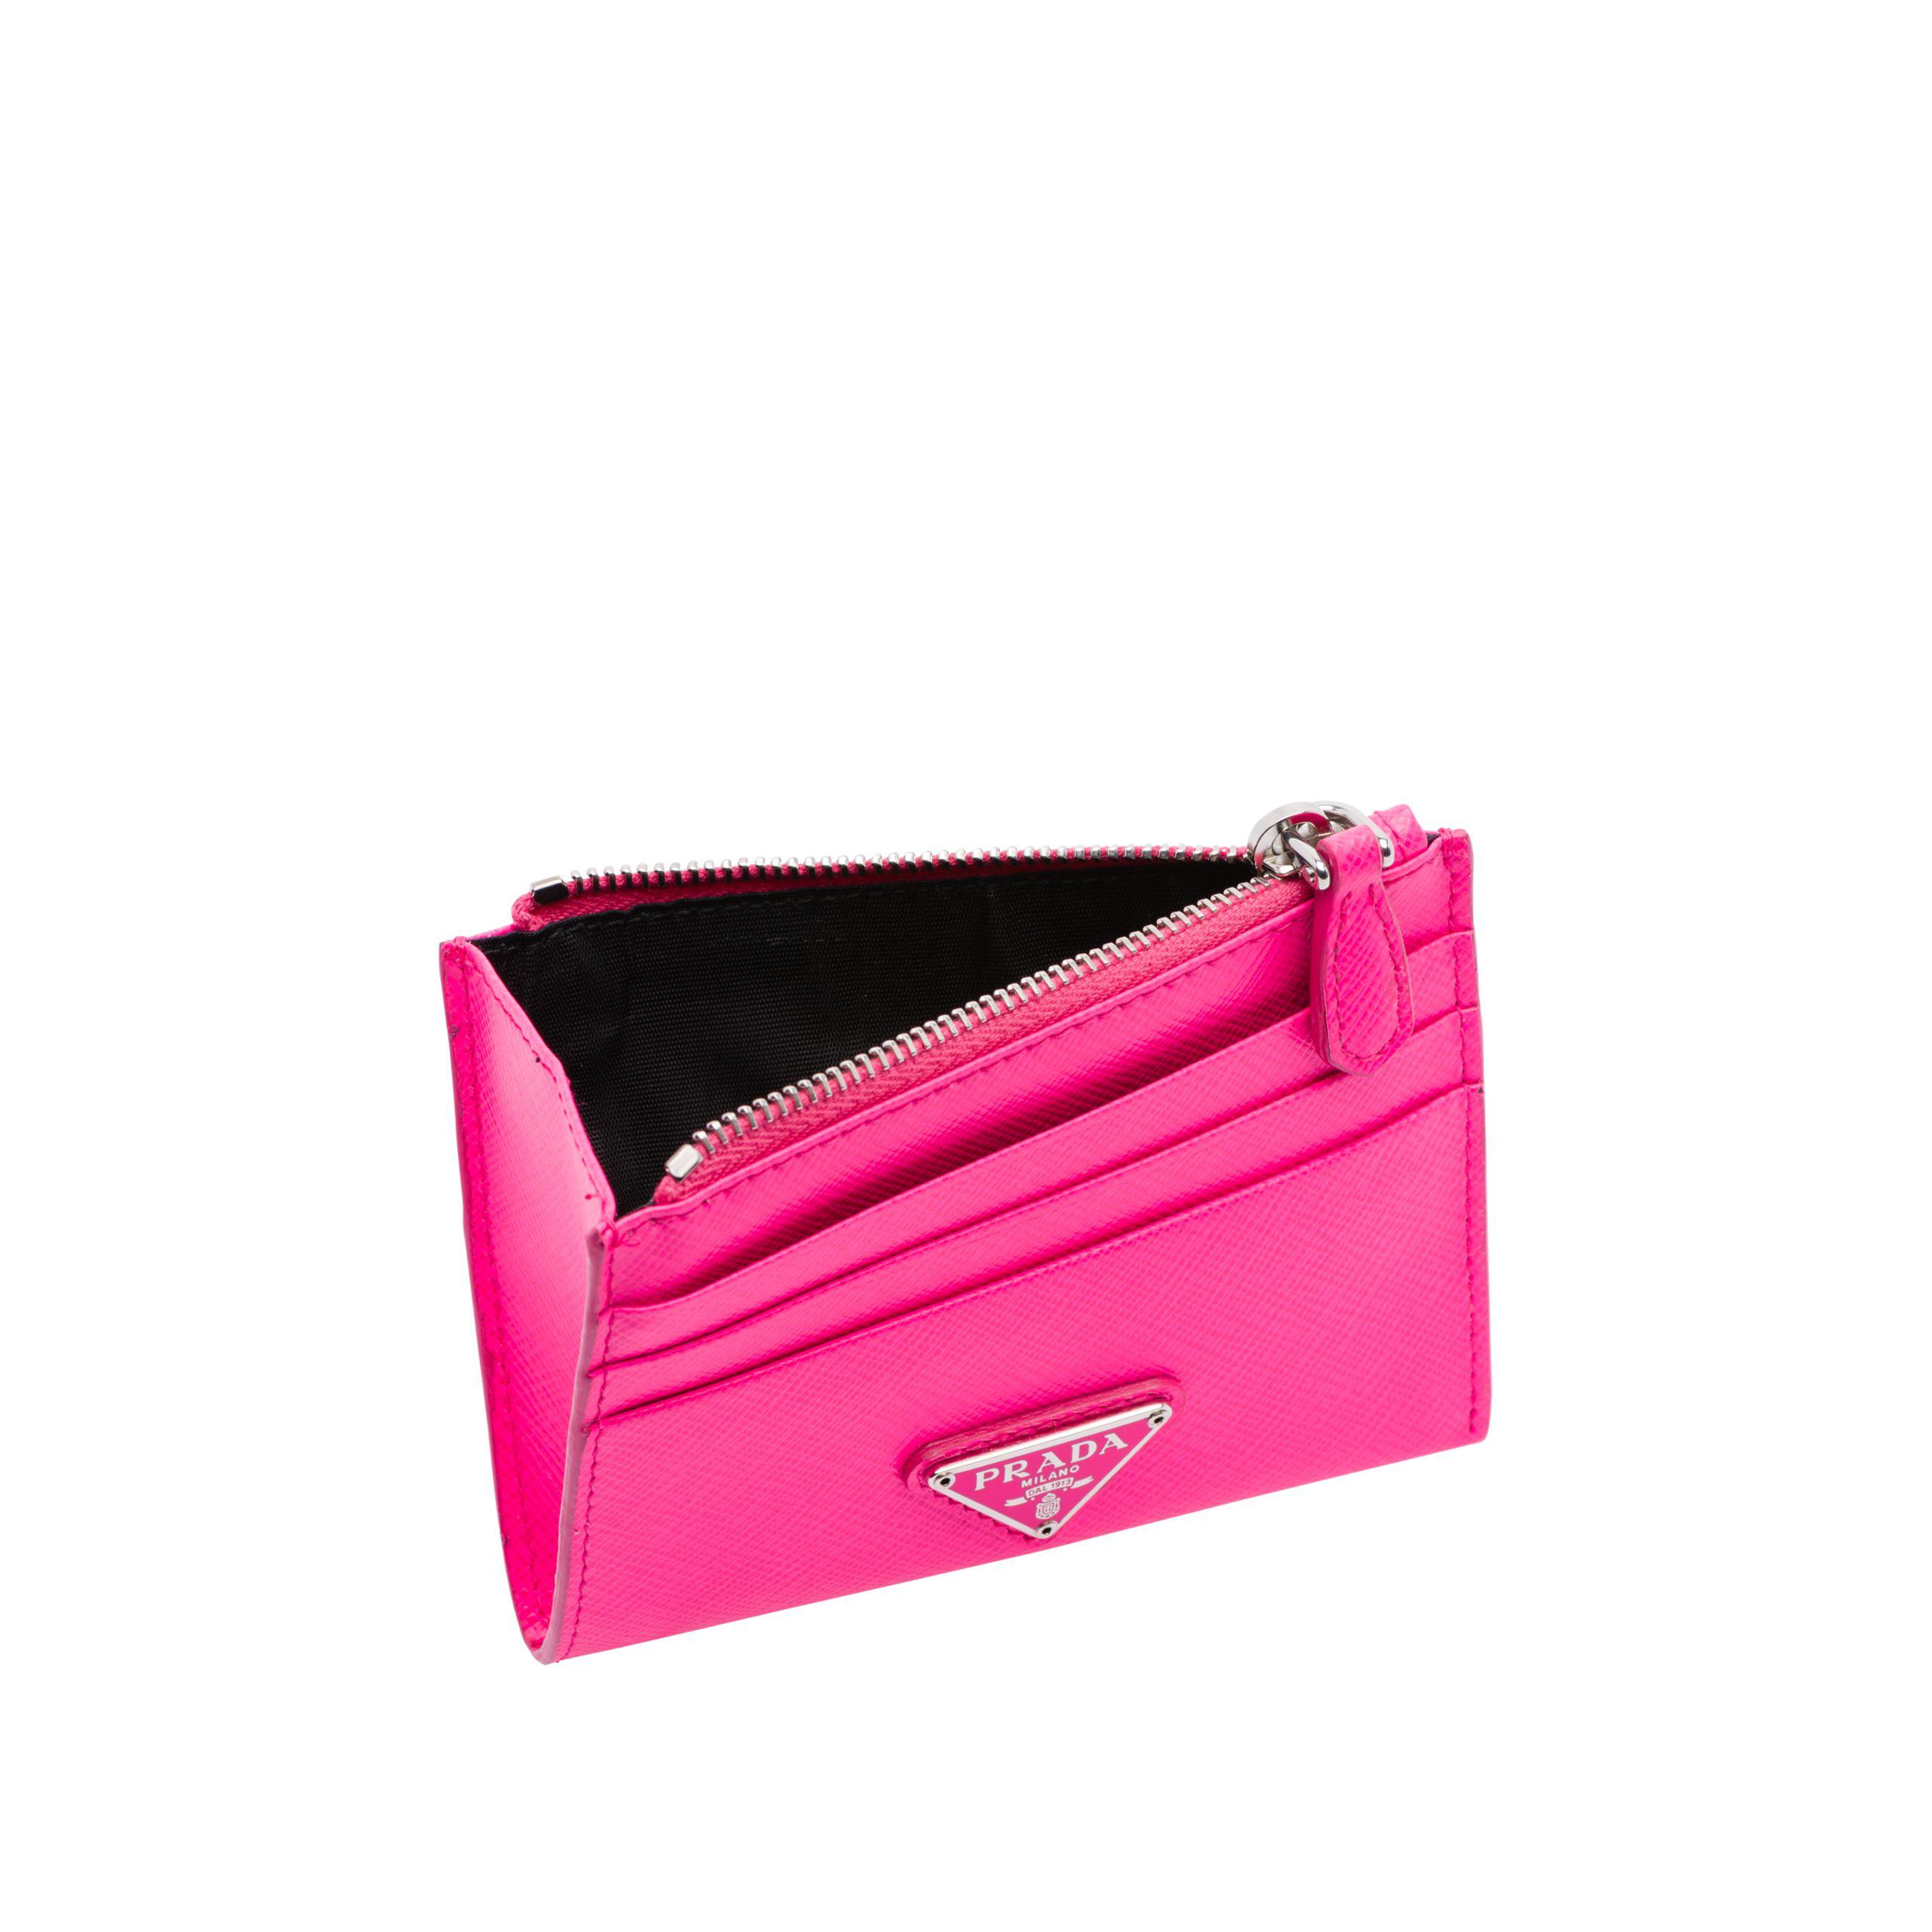 Prada Saffiano Leather Credit Card Holder in Pink - Lyst